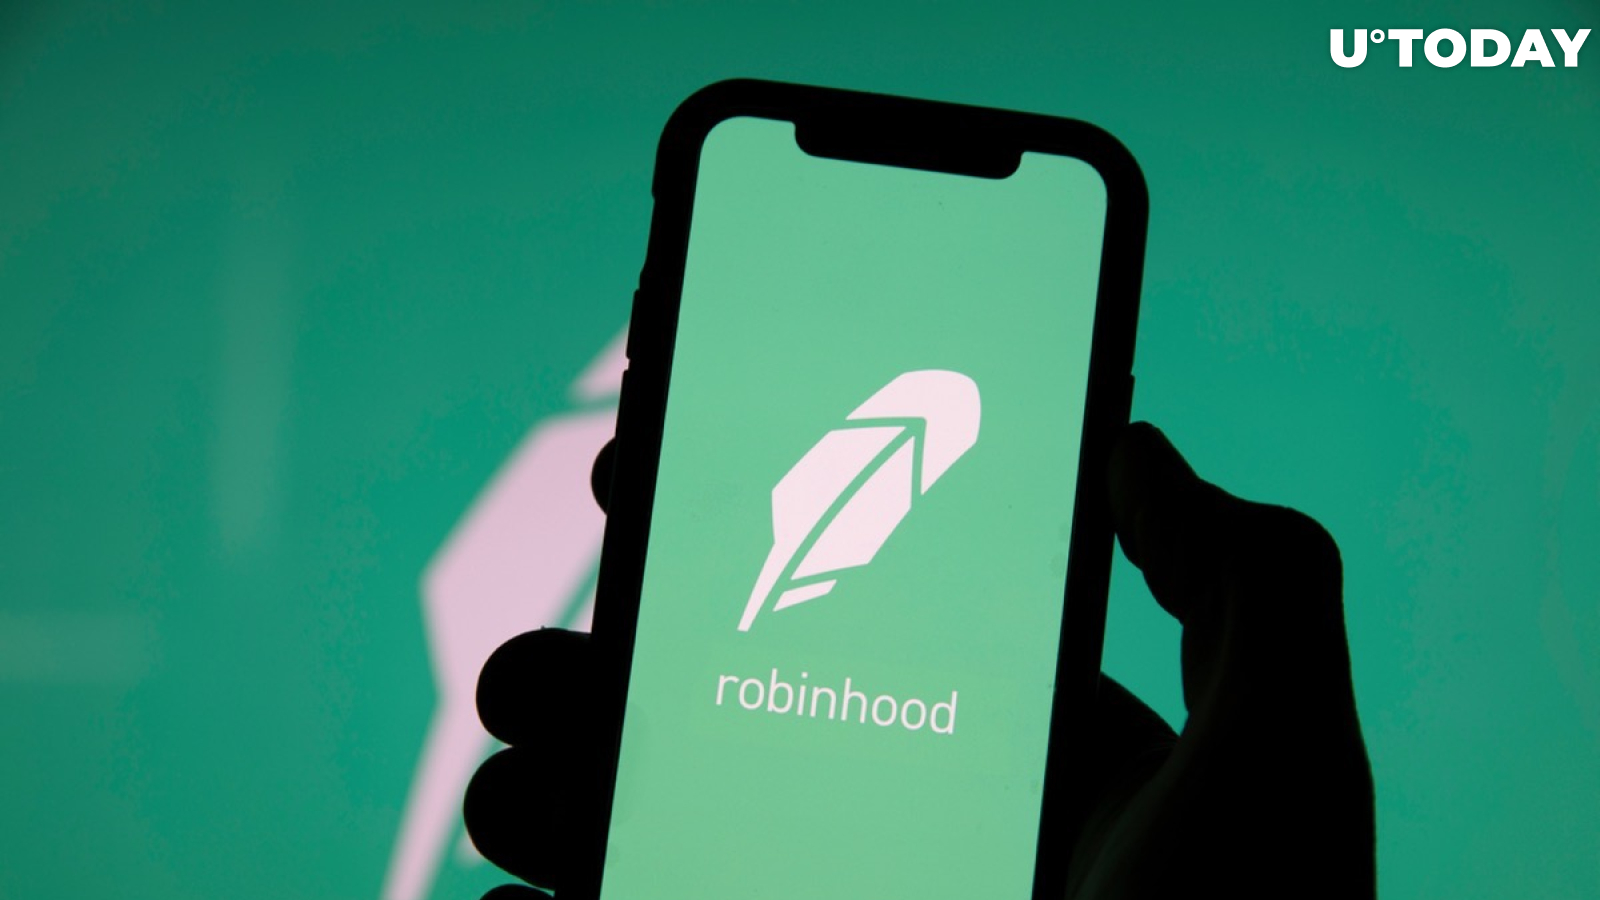 DOGE Lovers Rejoice: Robinhood Teases Dogecoin Support for its New Wallet